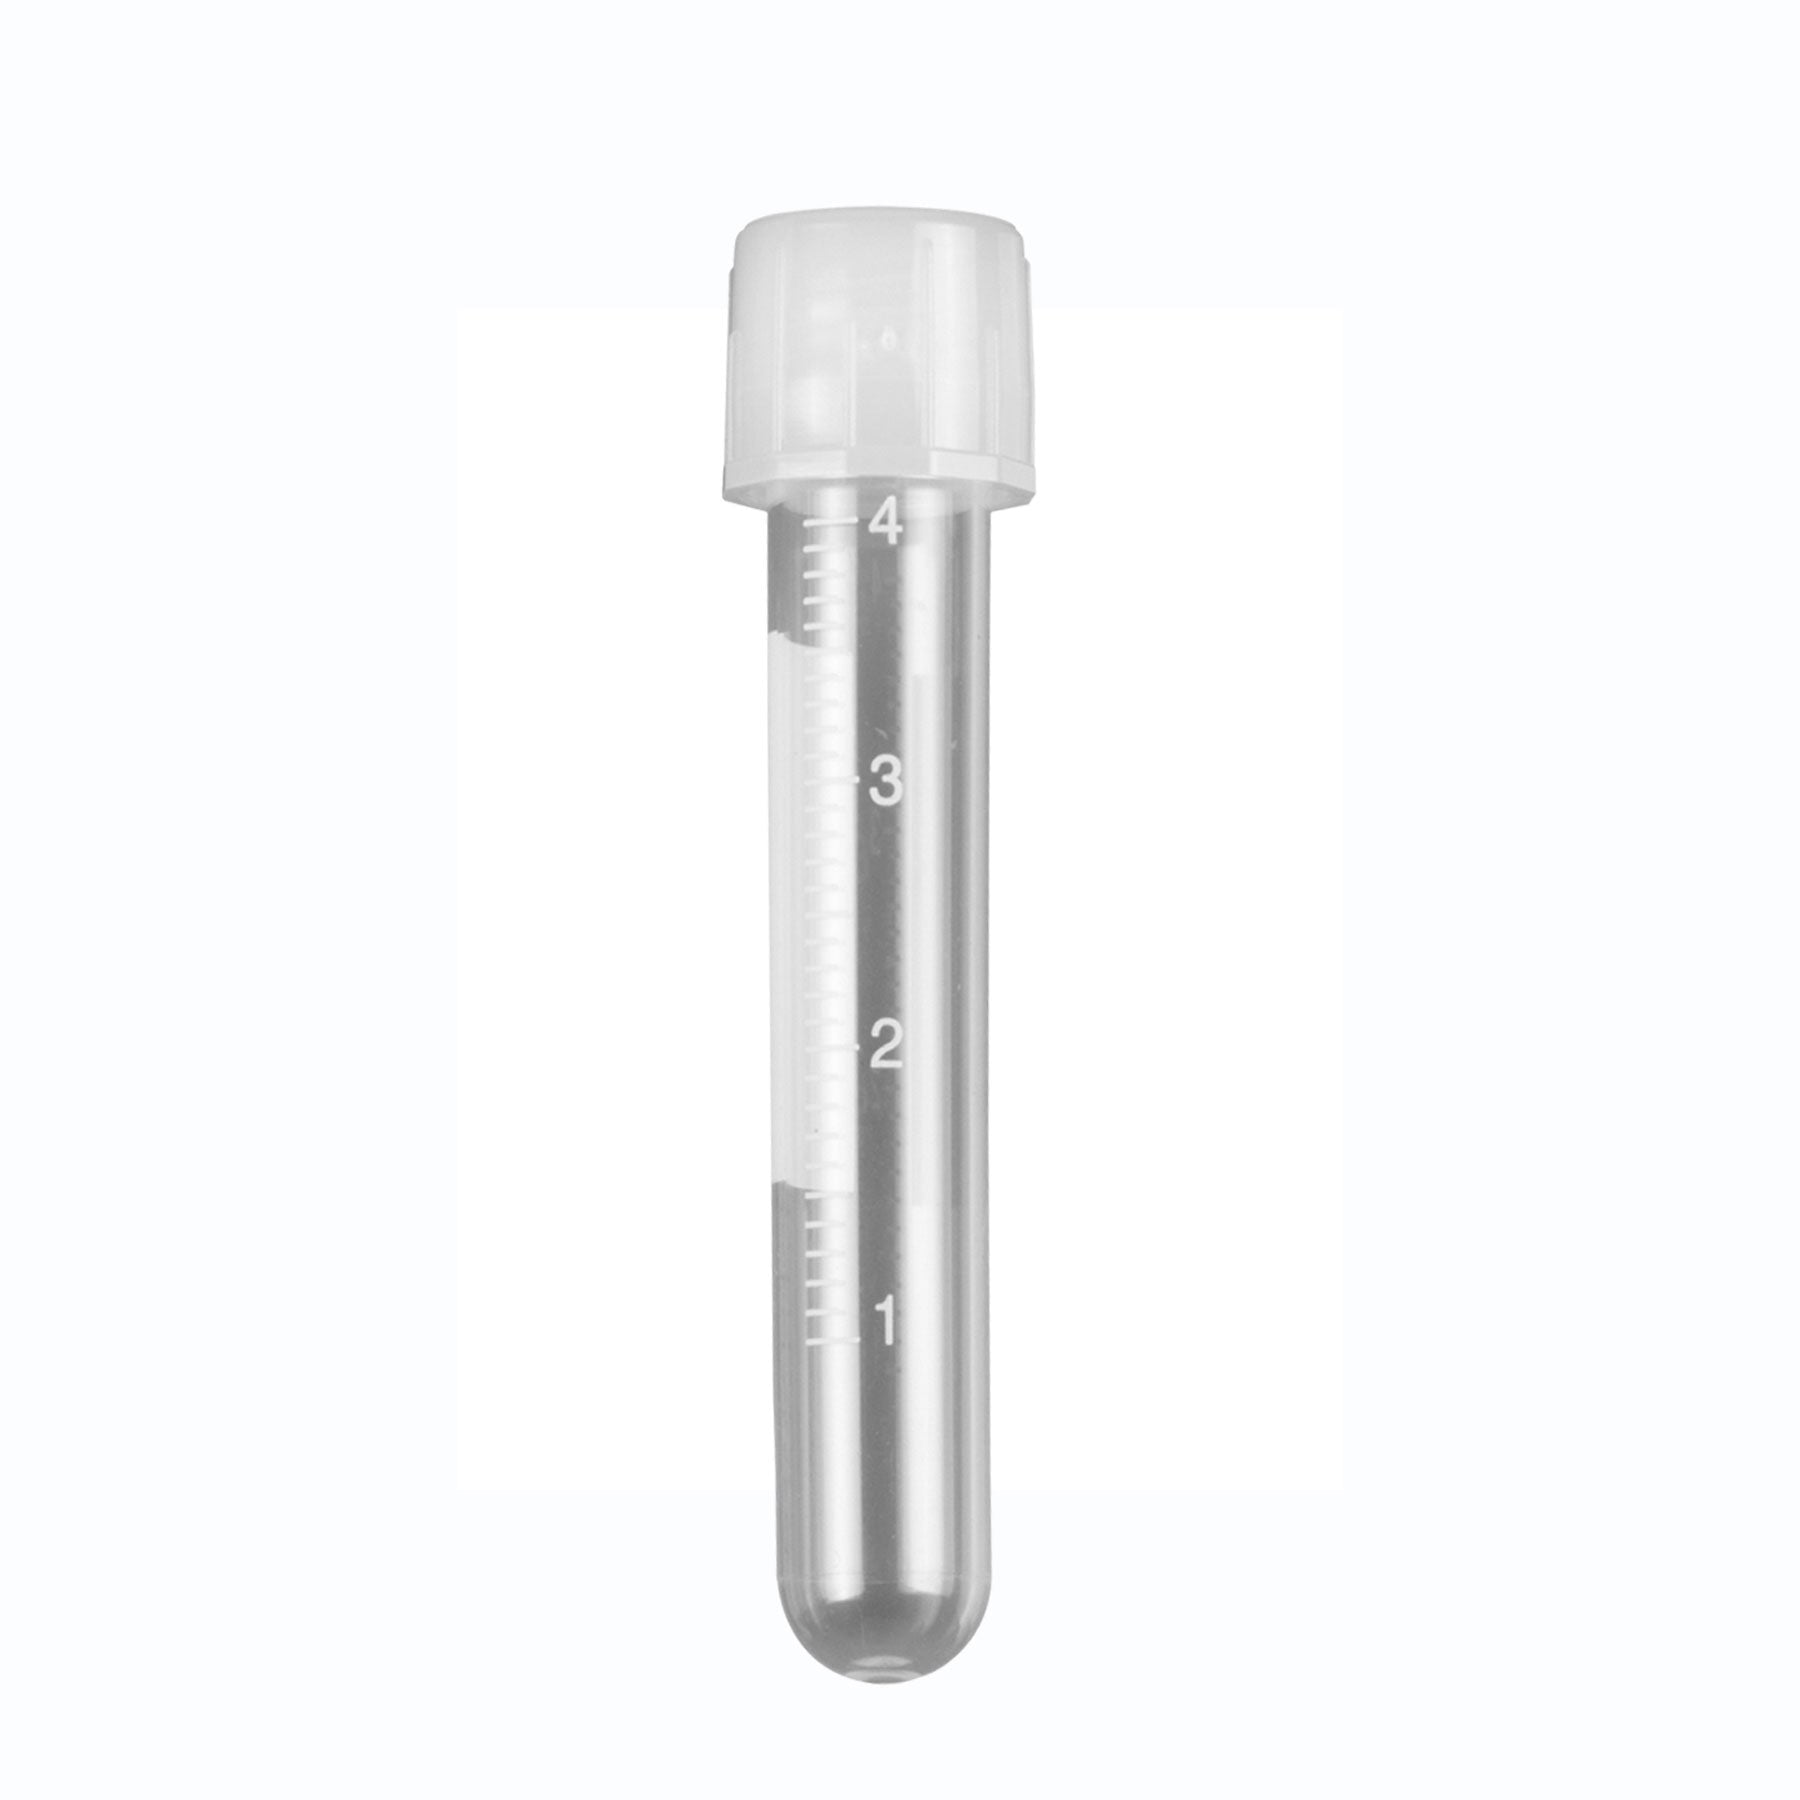 MTC Bio T8750, DuoClick Culture Tube, 5ml, 12 X 75Mm, PP, with Separate 2-Position Screw-Cap, Non-Sterile, Non-Graduated, 1000 Tubes And Capped Bulk Packed Separately